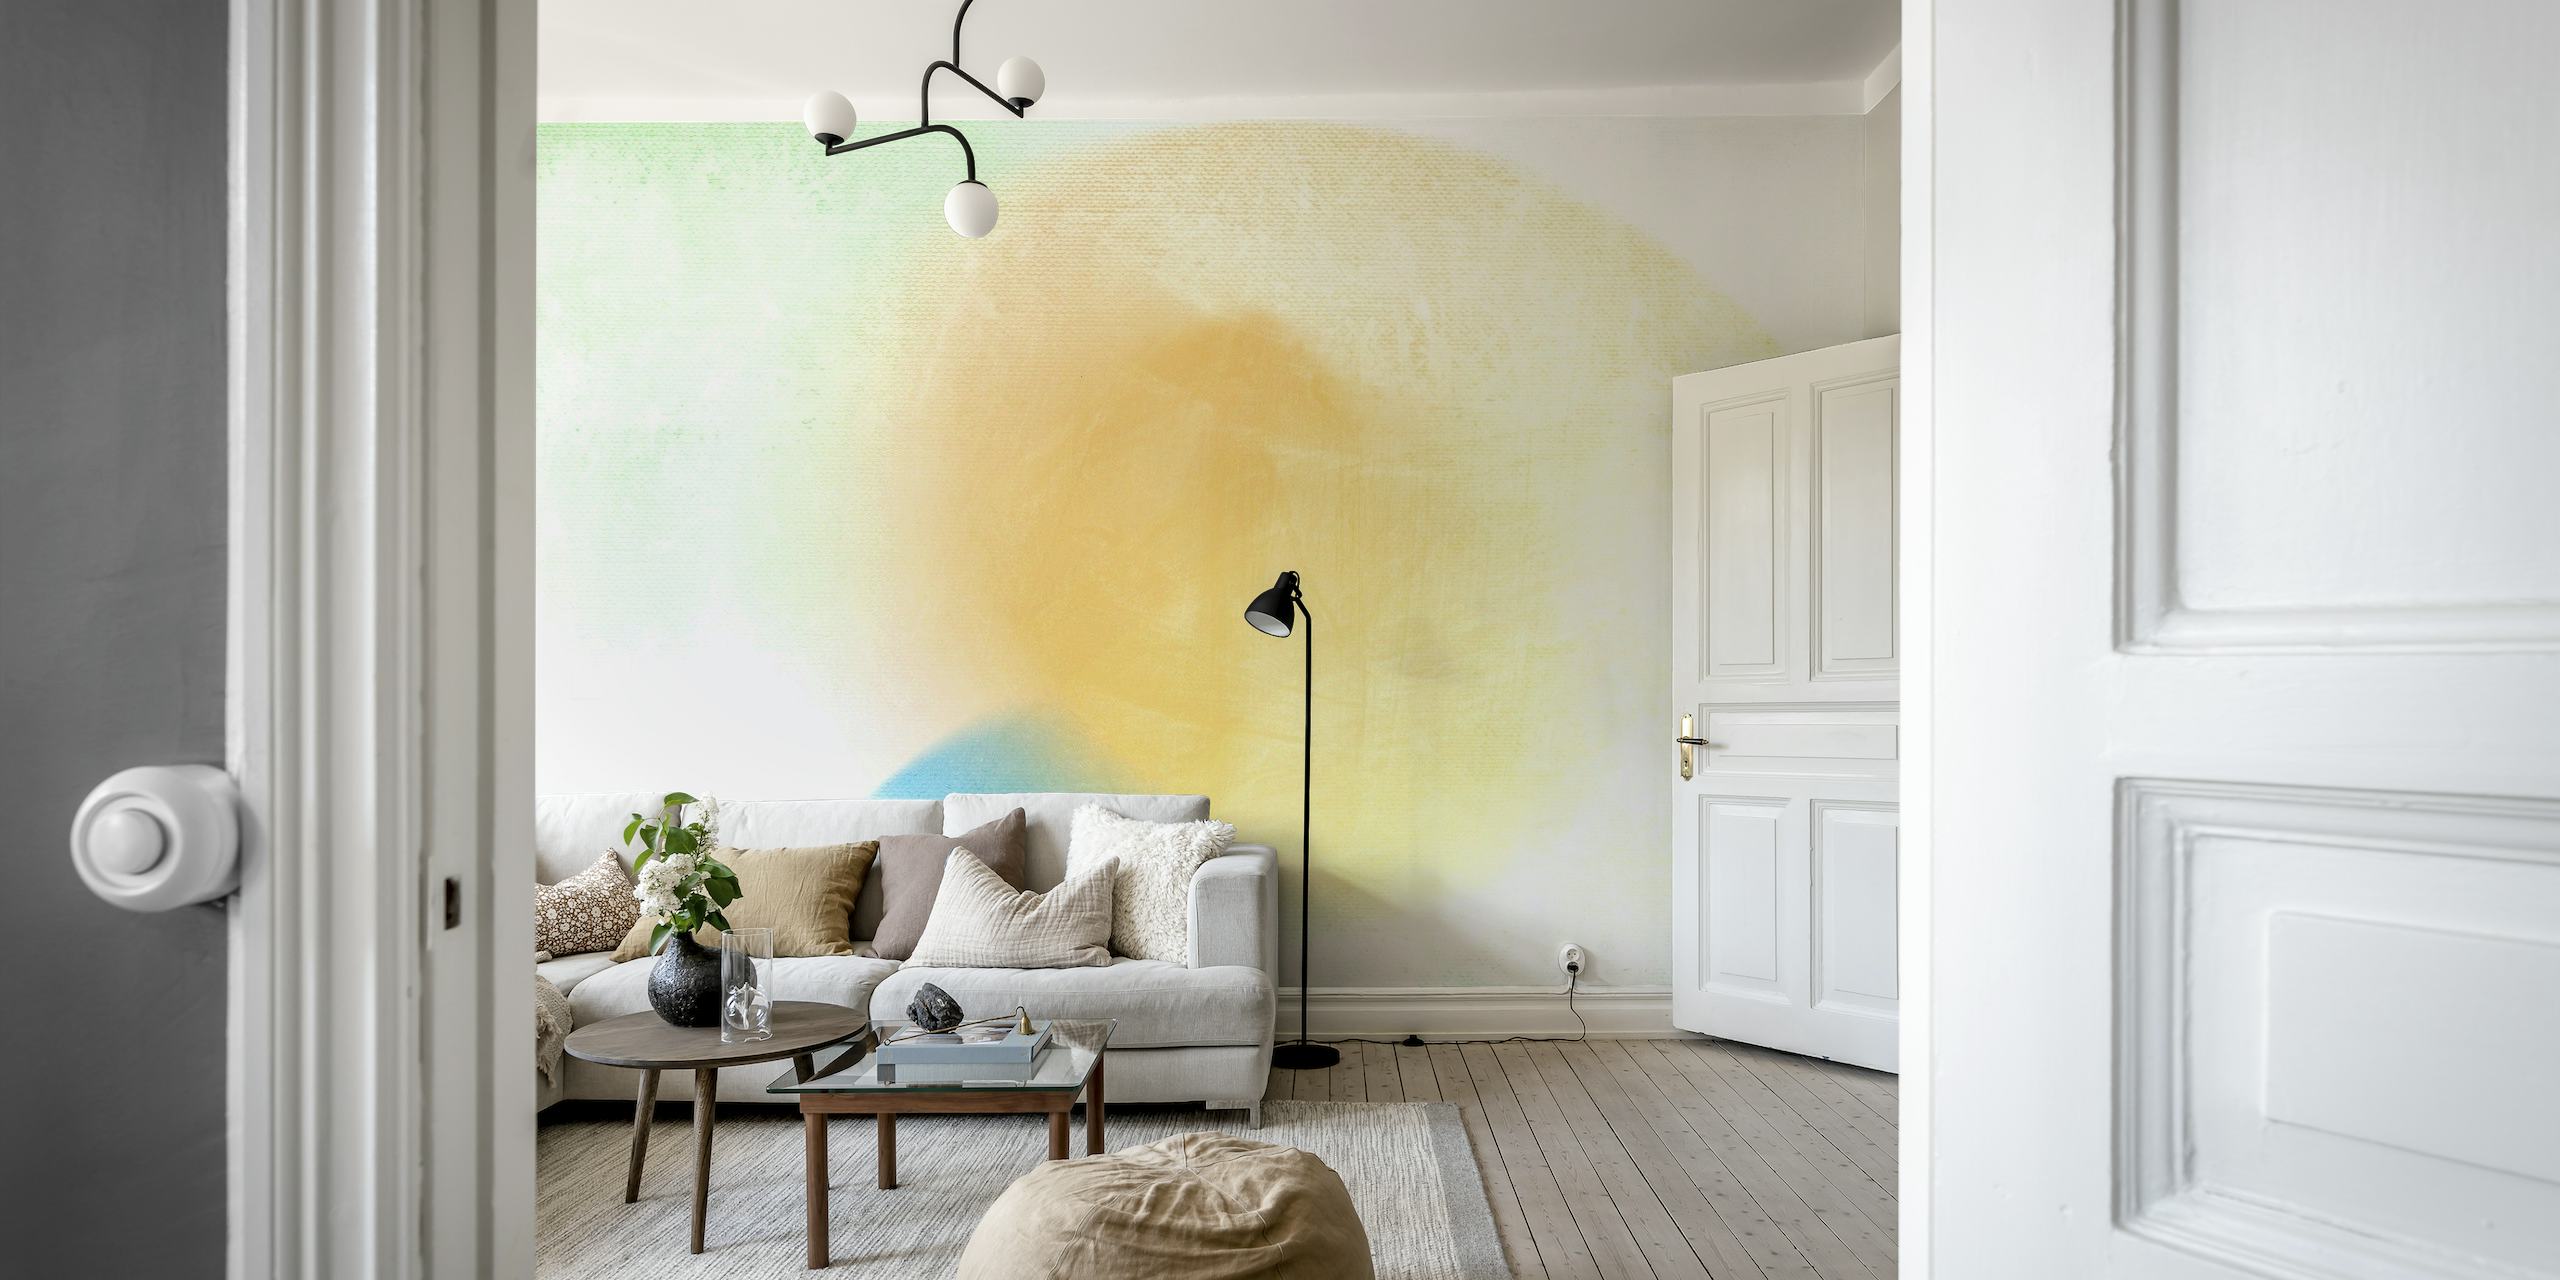 Abstract pastel-colored wall mural representing springtime freshness